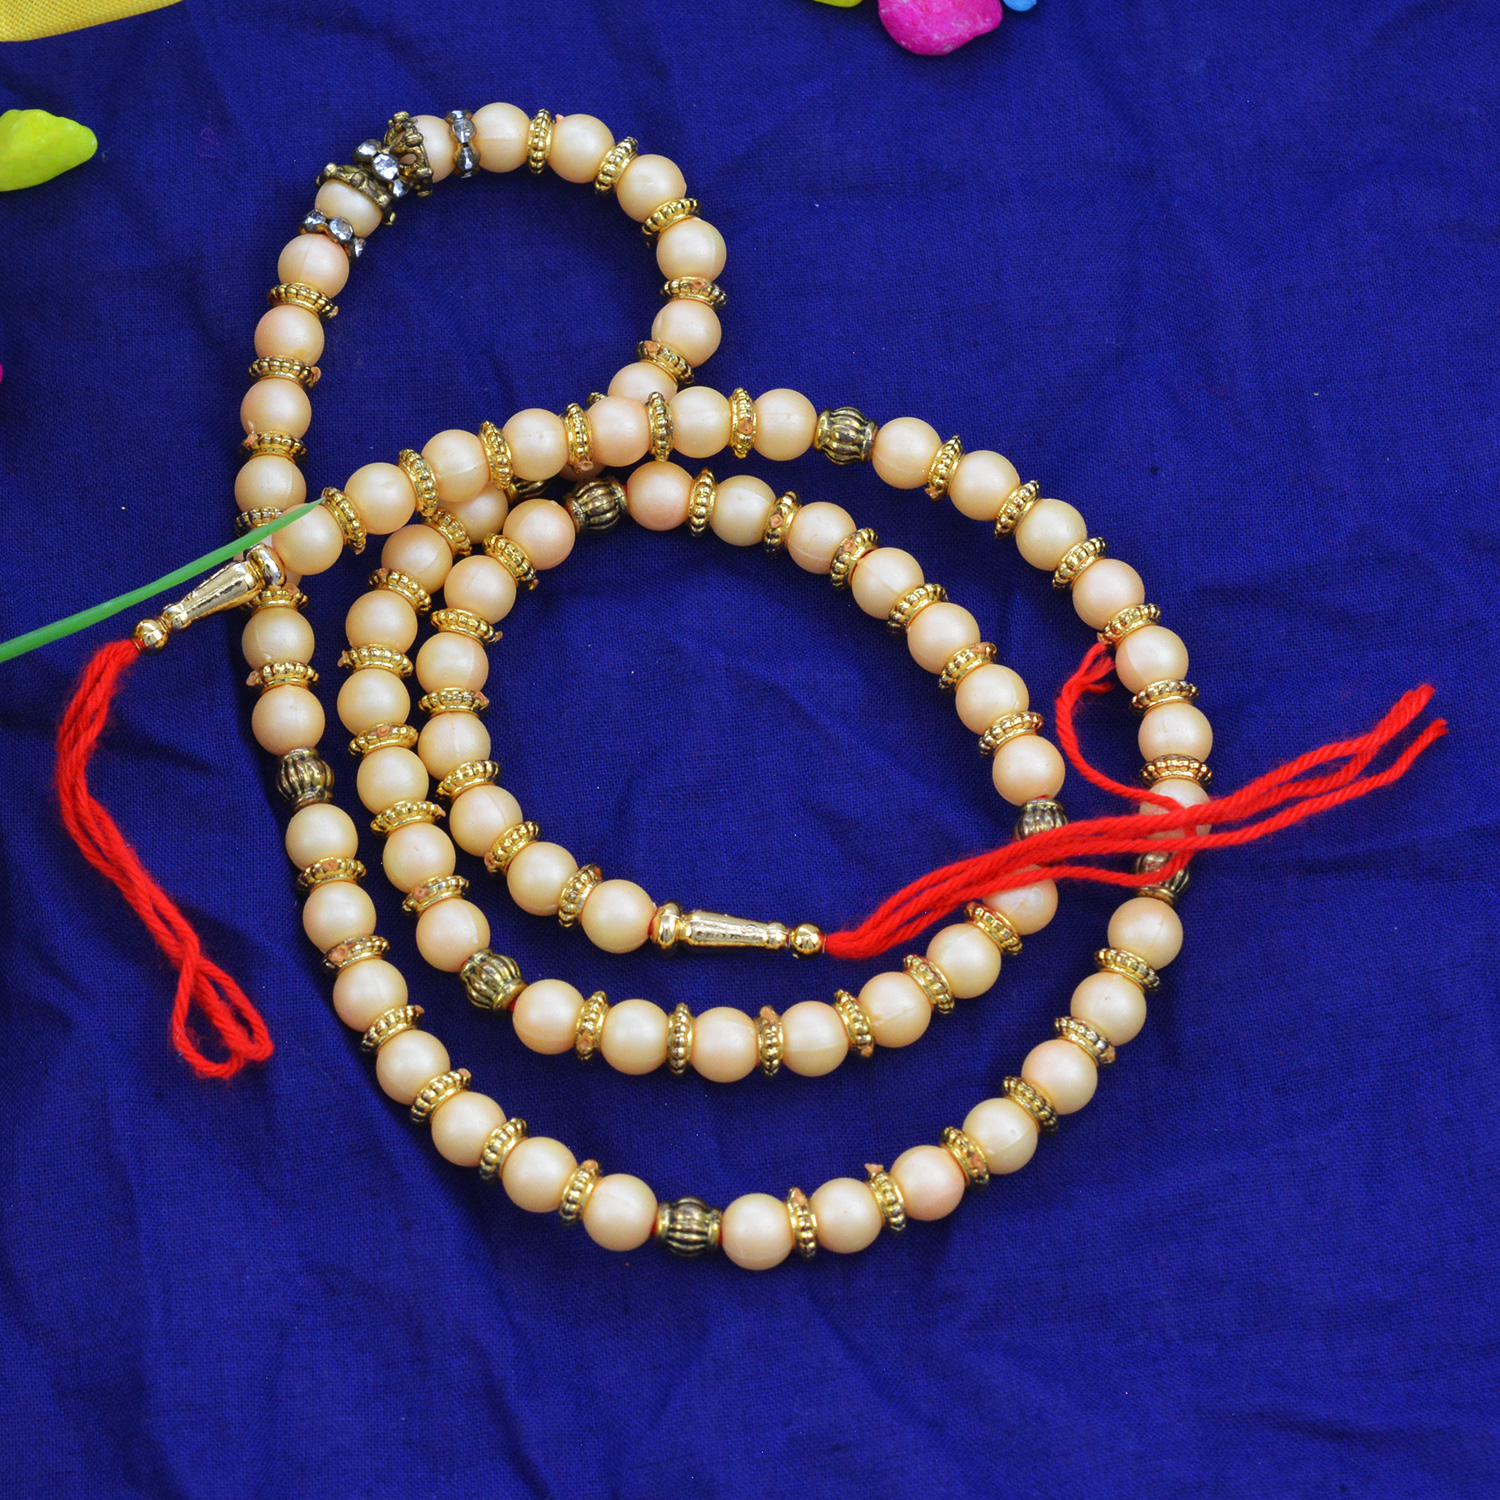 Beautiful and Marvelous Golden Pearls Garland with Red Silk Thread